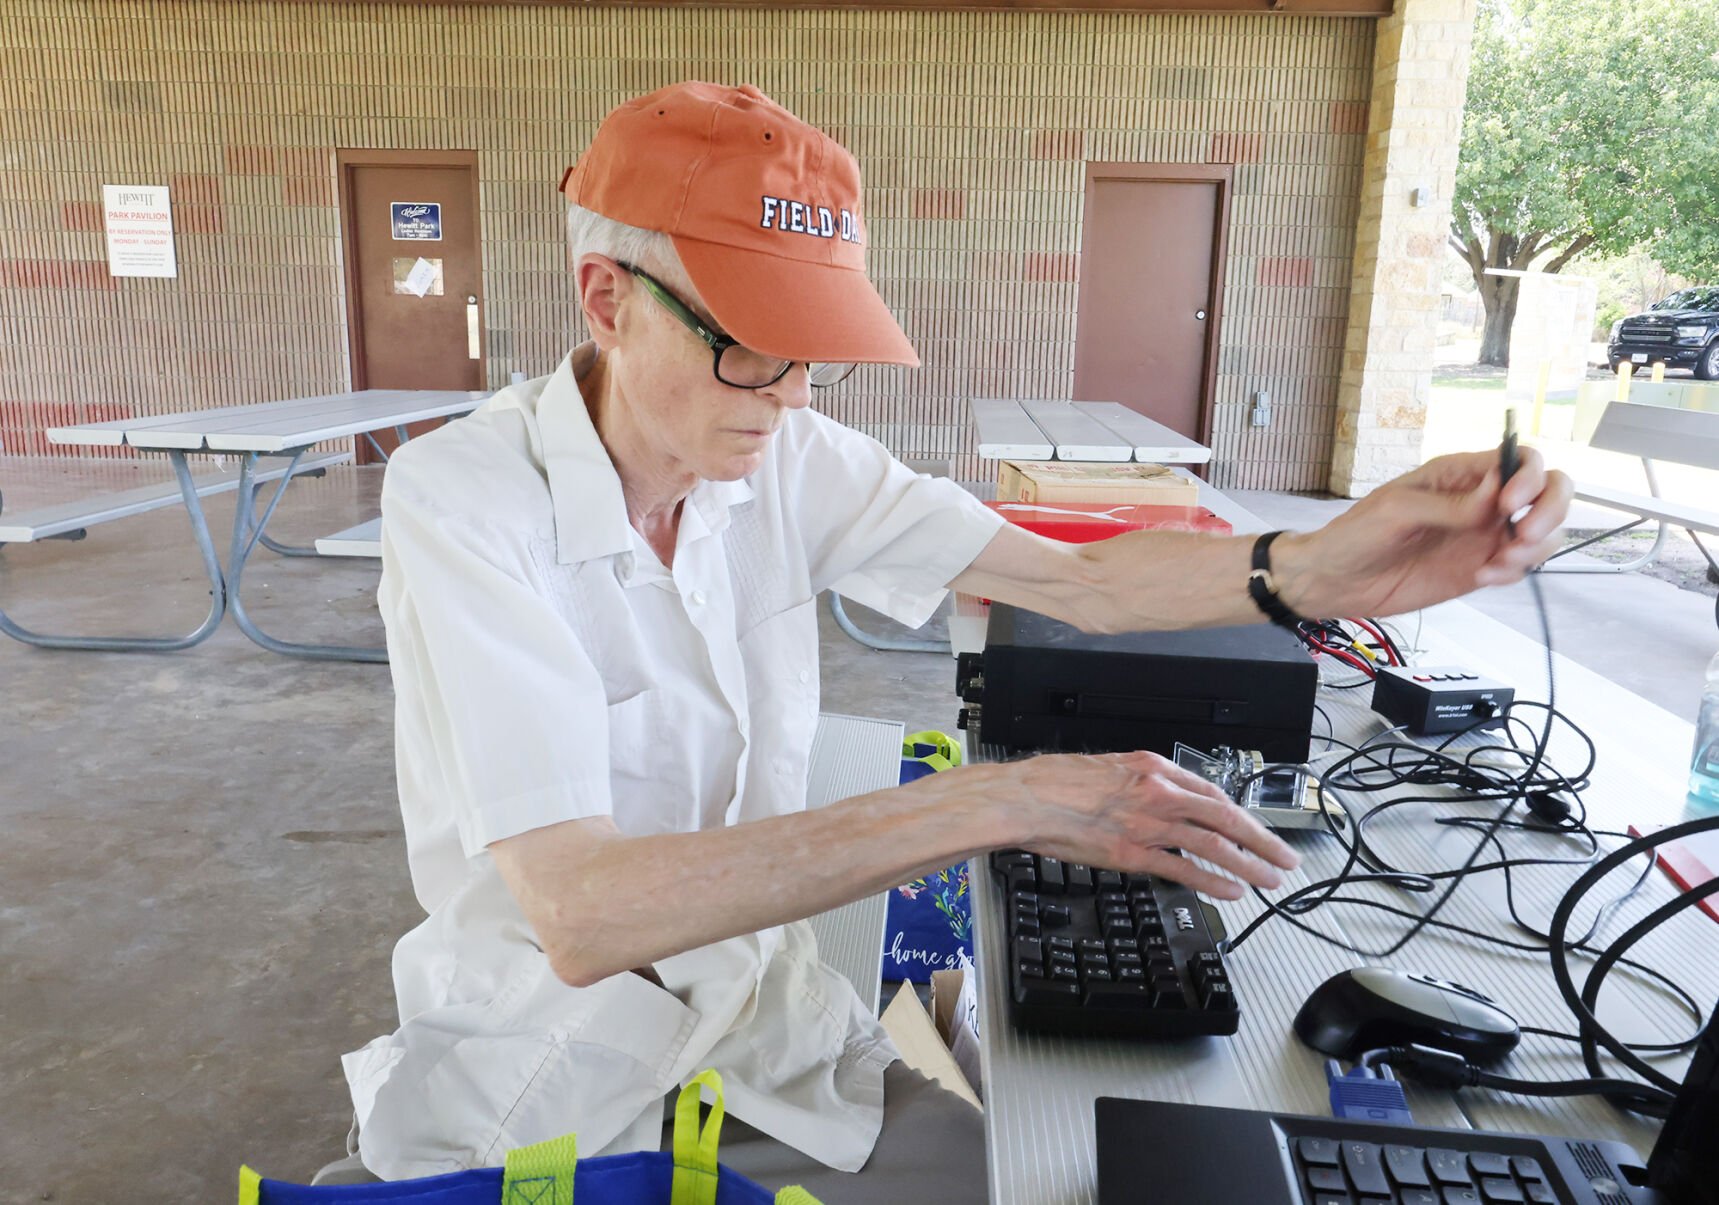 Field Day brings ham radio operators to Hewitt Park for nationwide event image